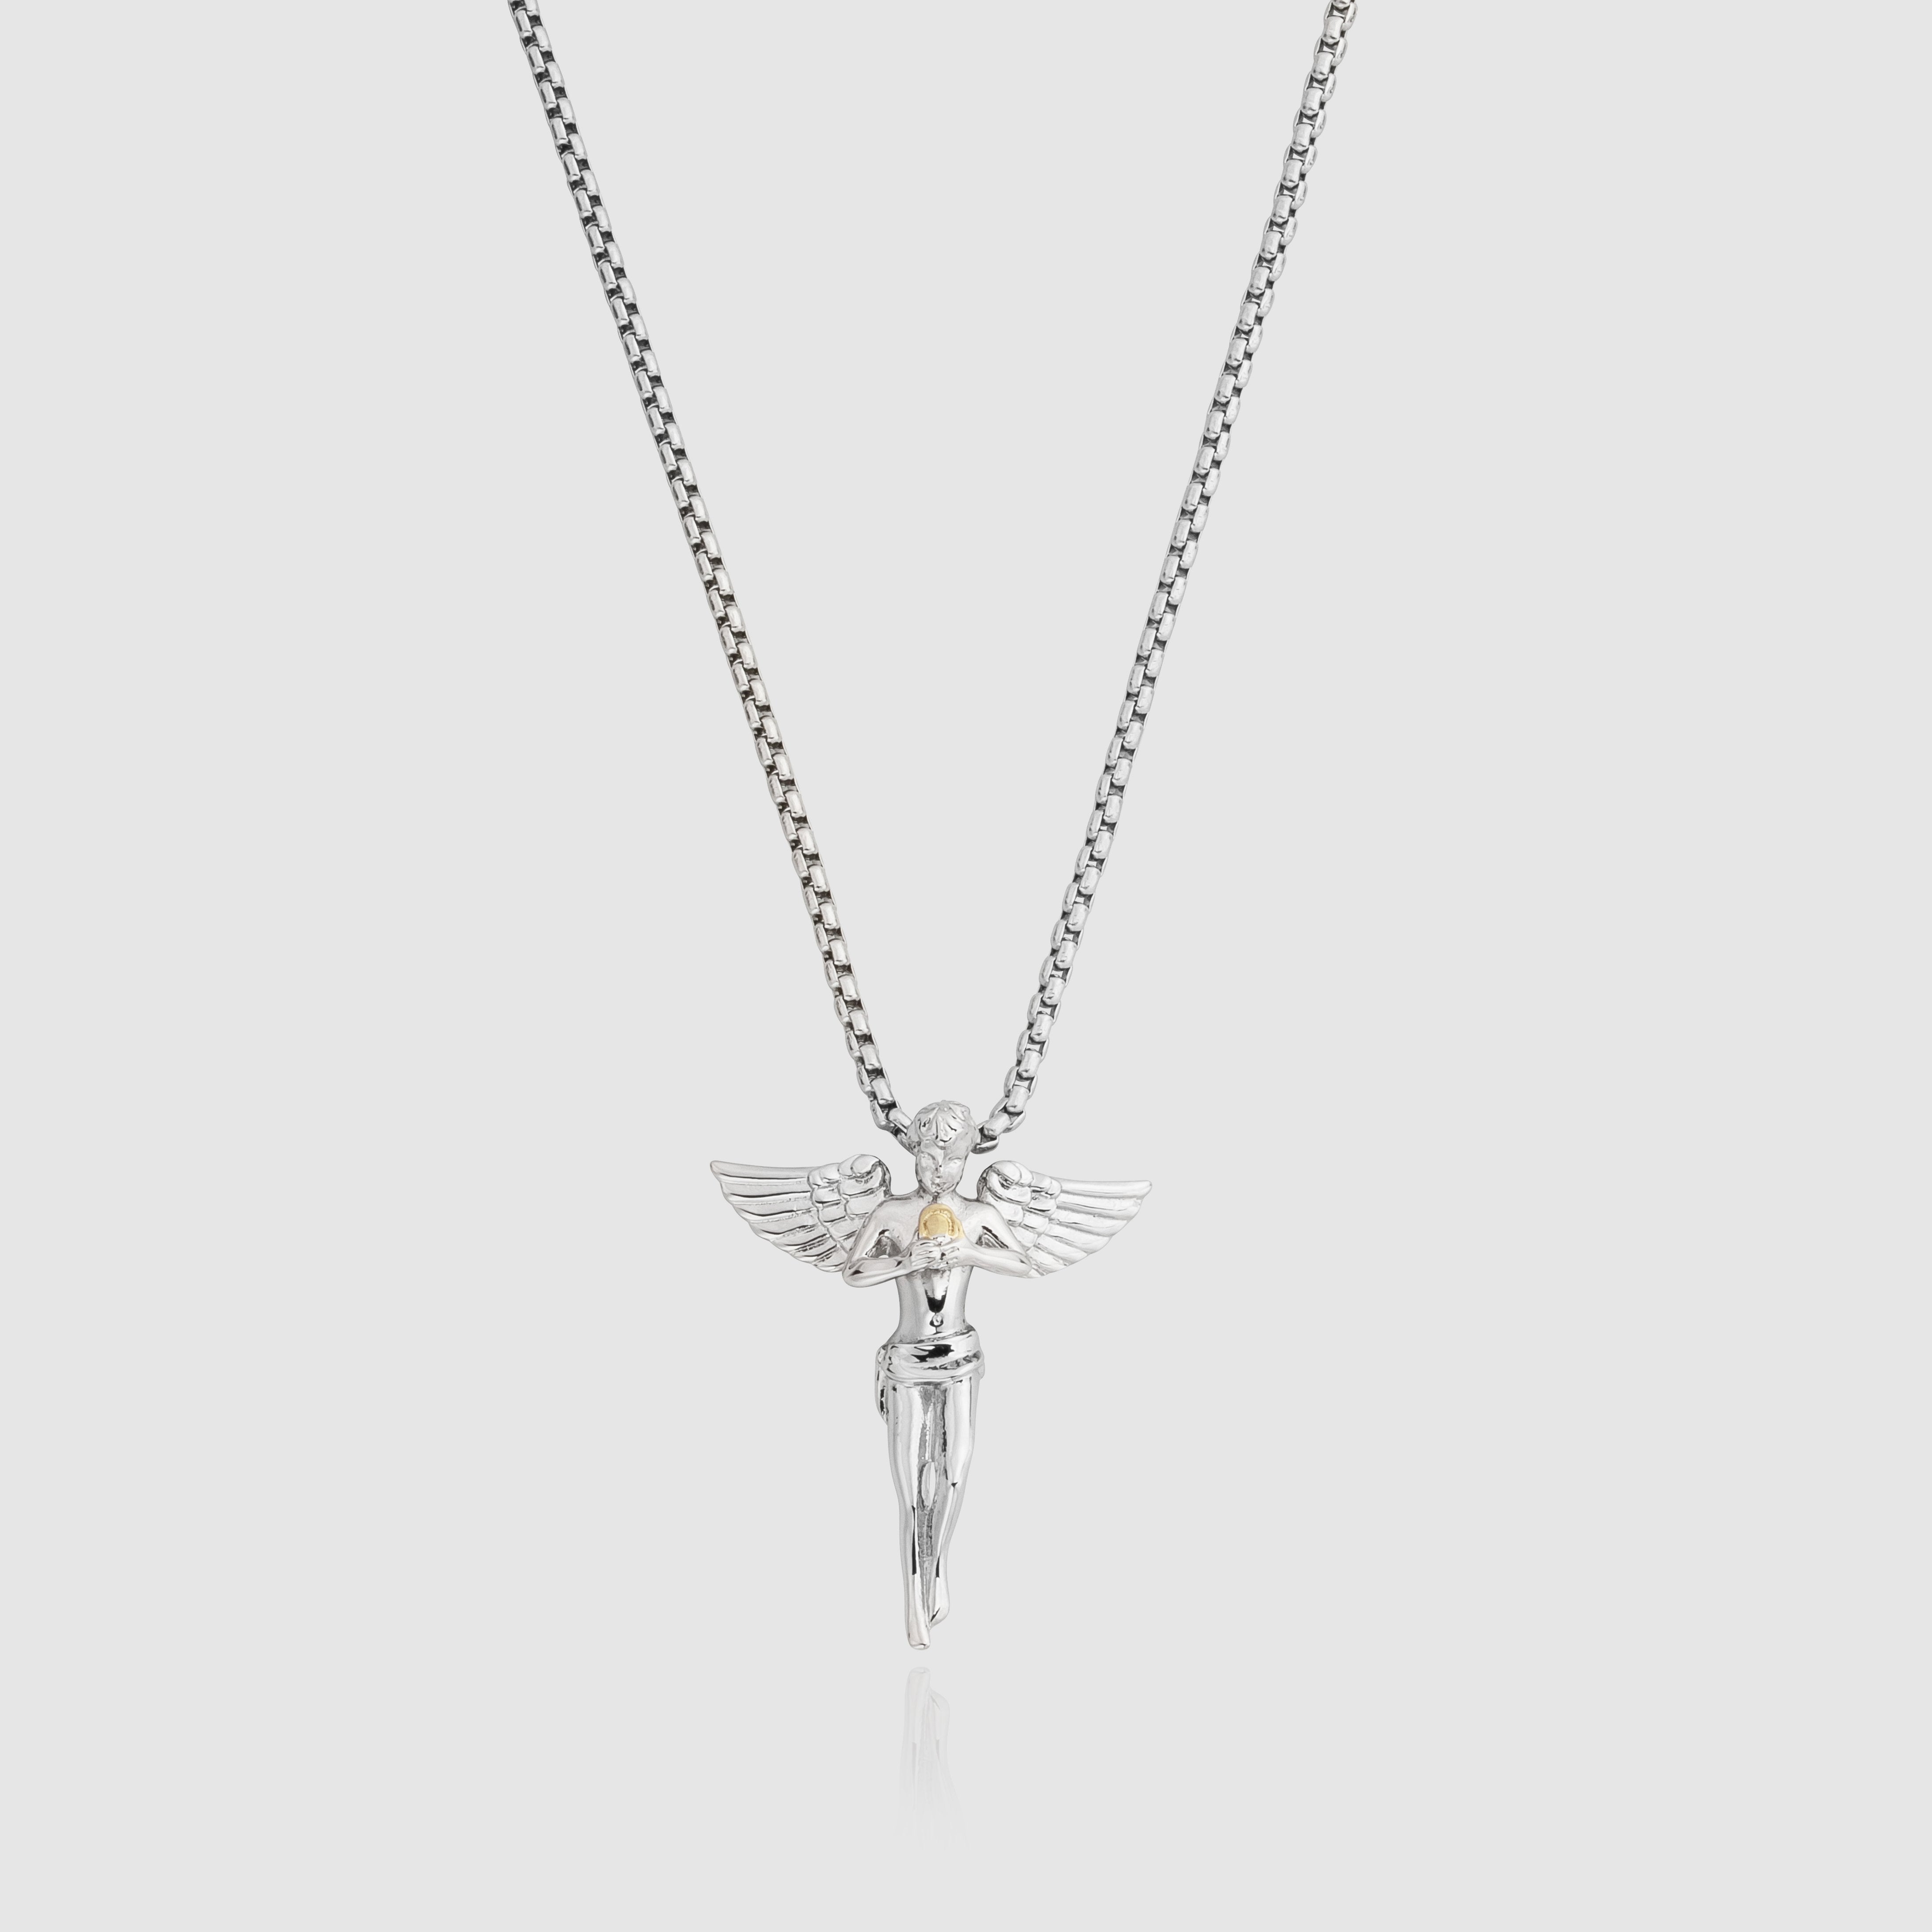 THE GUARDIAN ANGELS- GOLDEN PEARL NECKLACE With Anti-Tarnish Coating